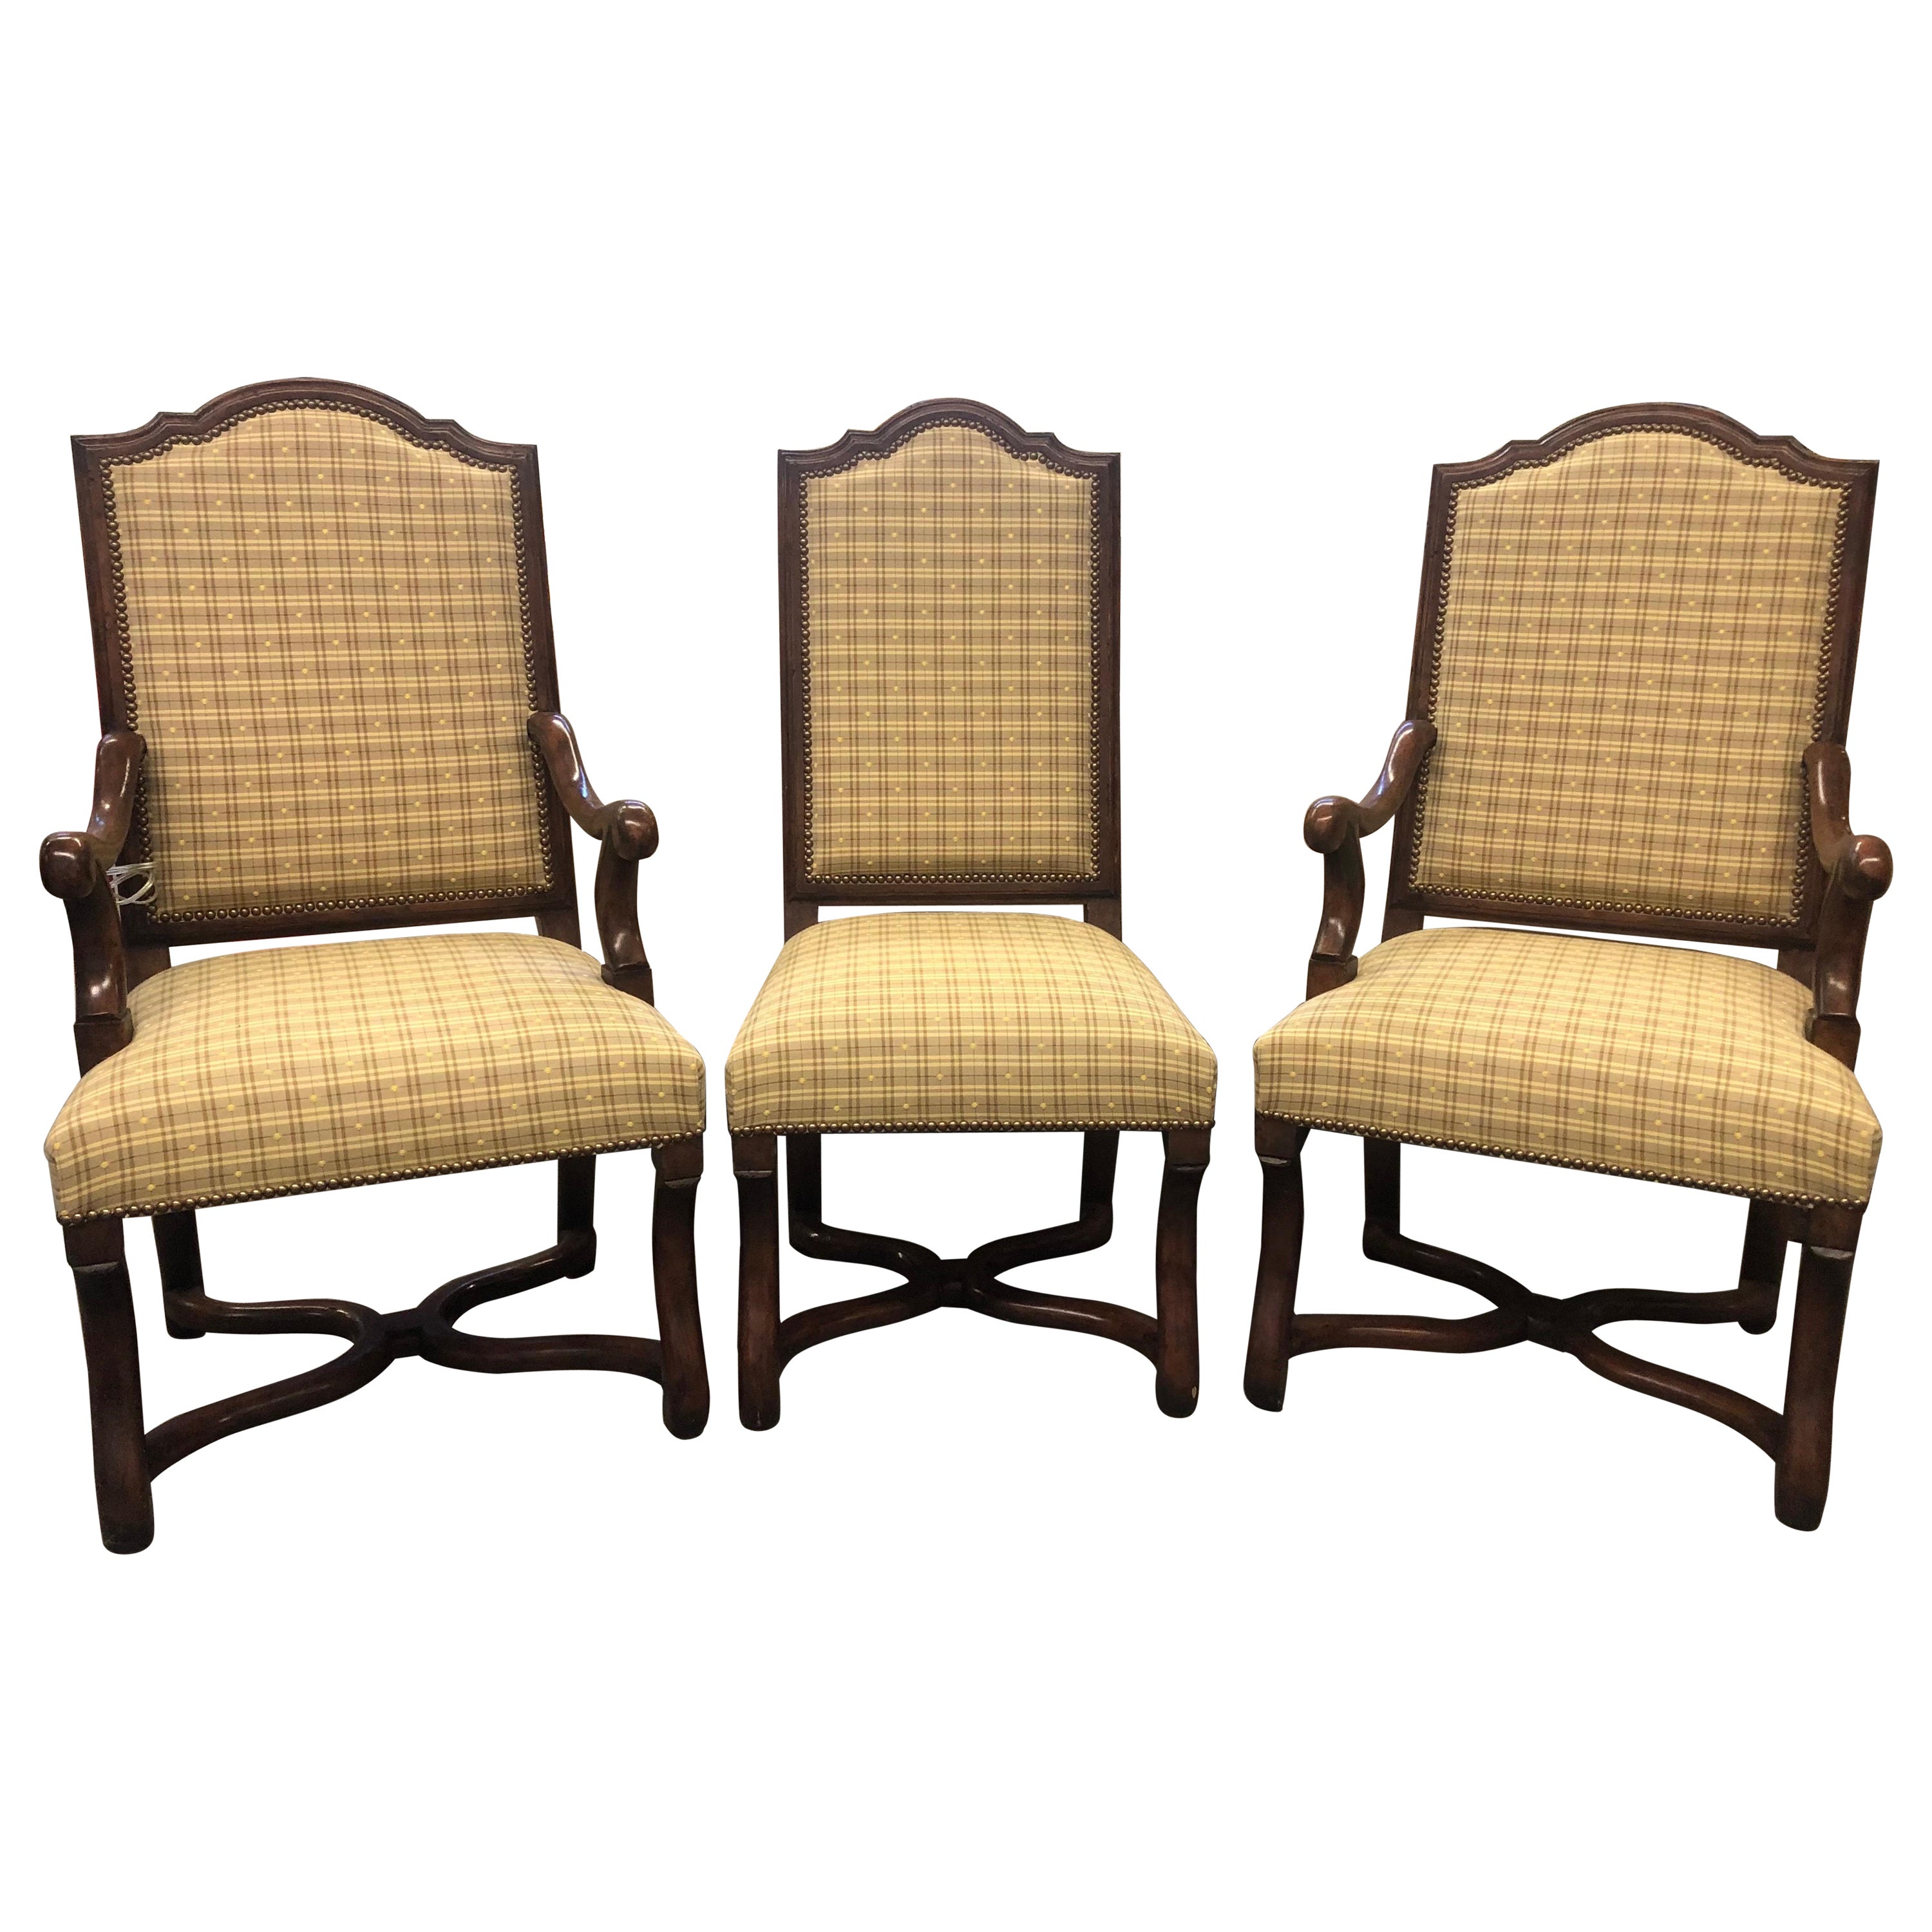 Minton-Spidell Dining Room Chairs